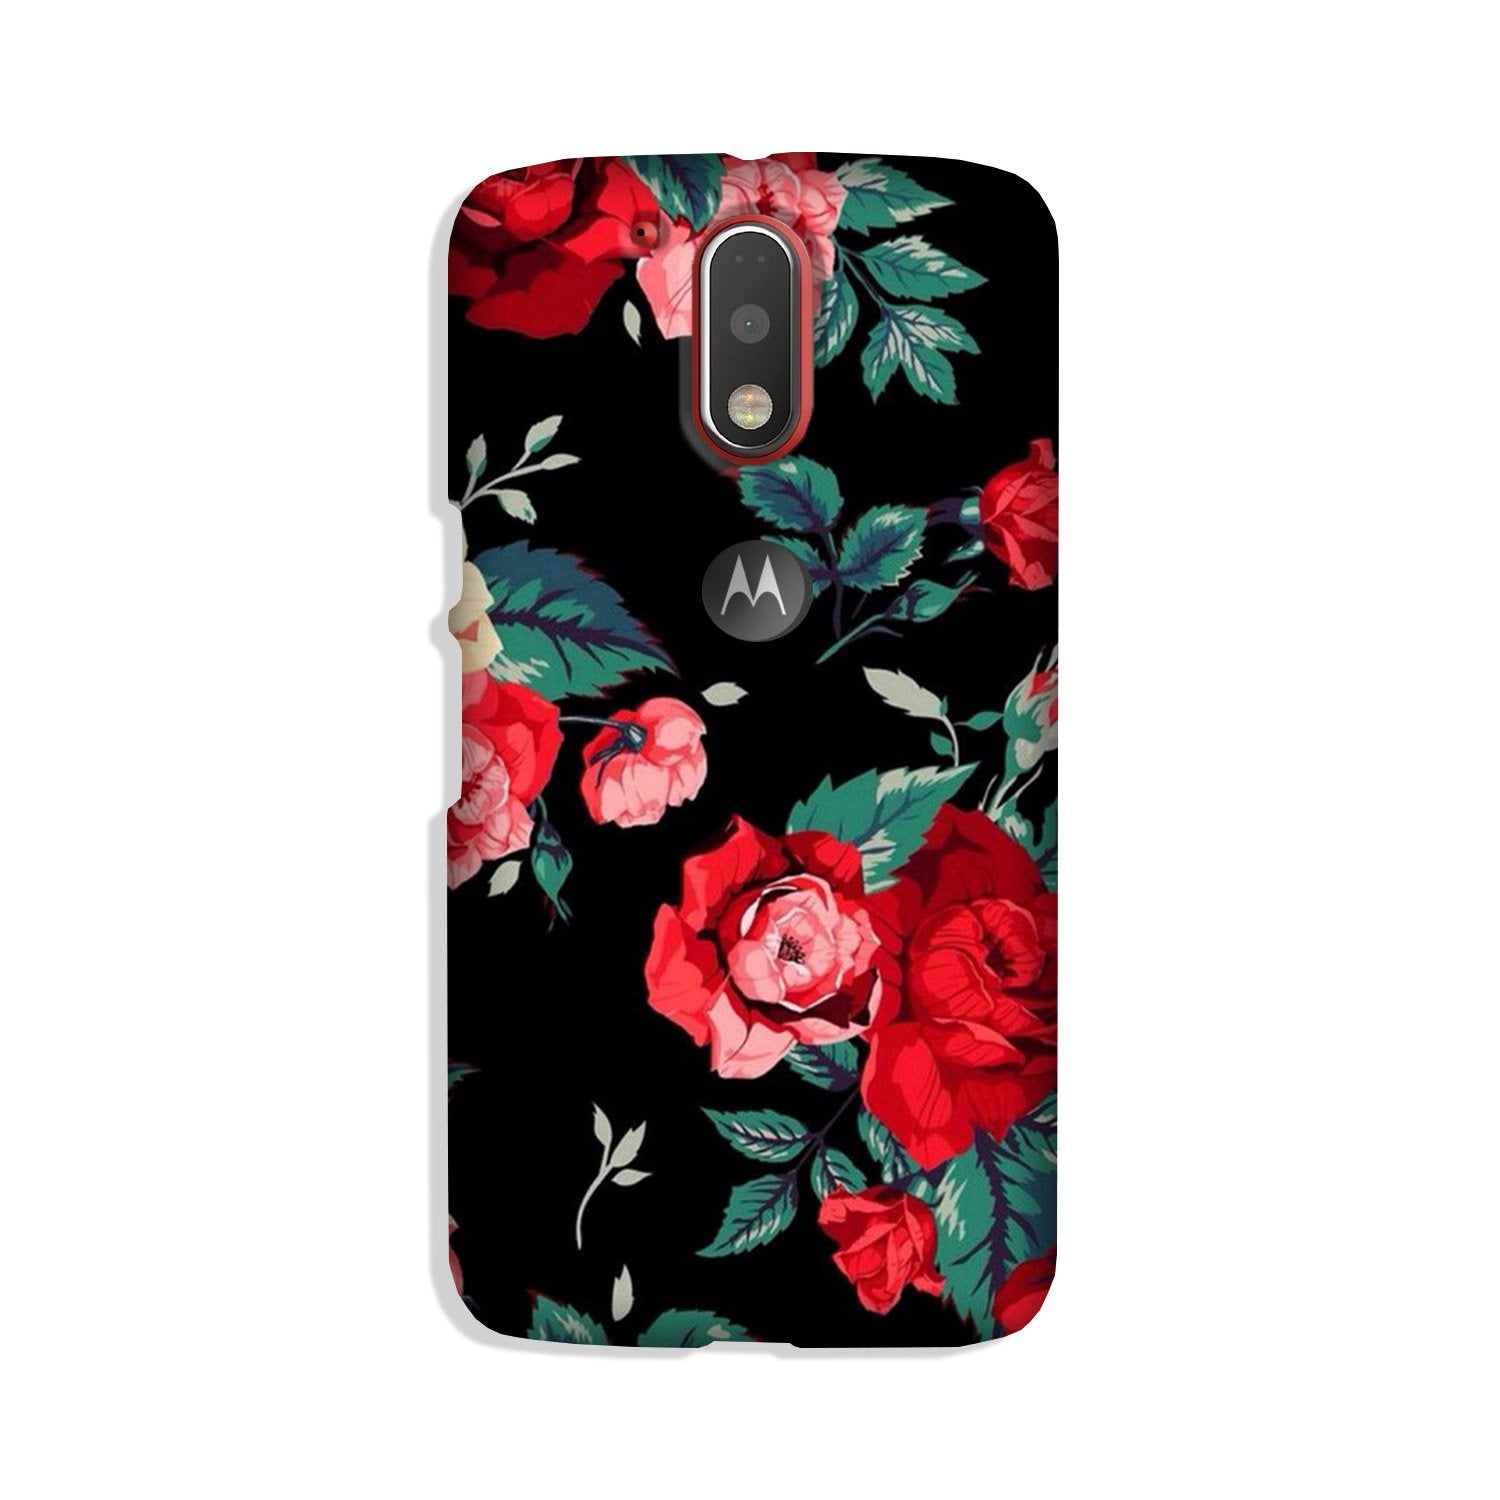 Red Rose Case for Moto G4 Plus